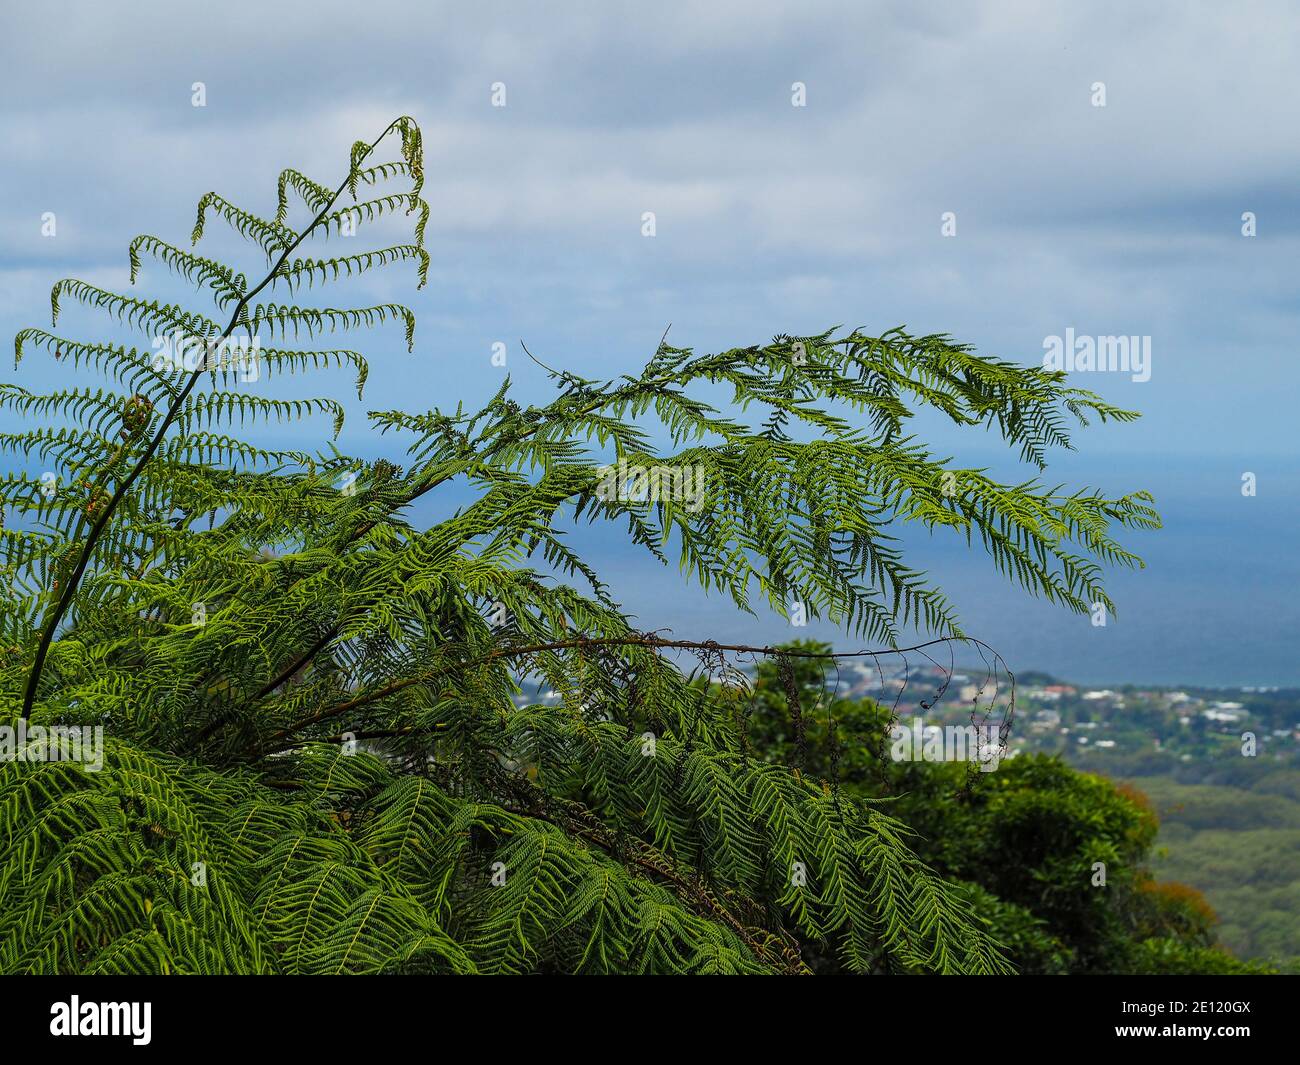 Green fern leaves with views of the coastal city of Coffs Harbour in the background, view from up high, NSW Australia Stock Photo